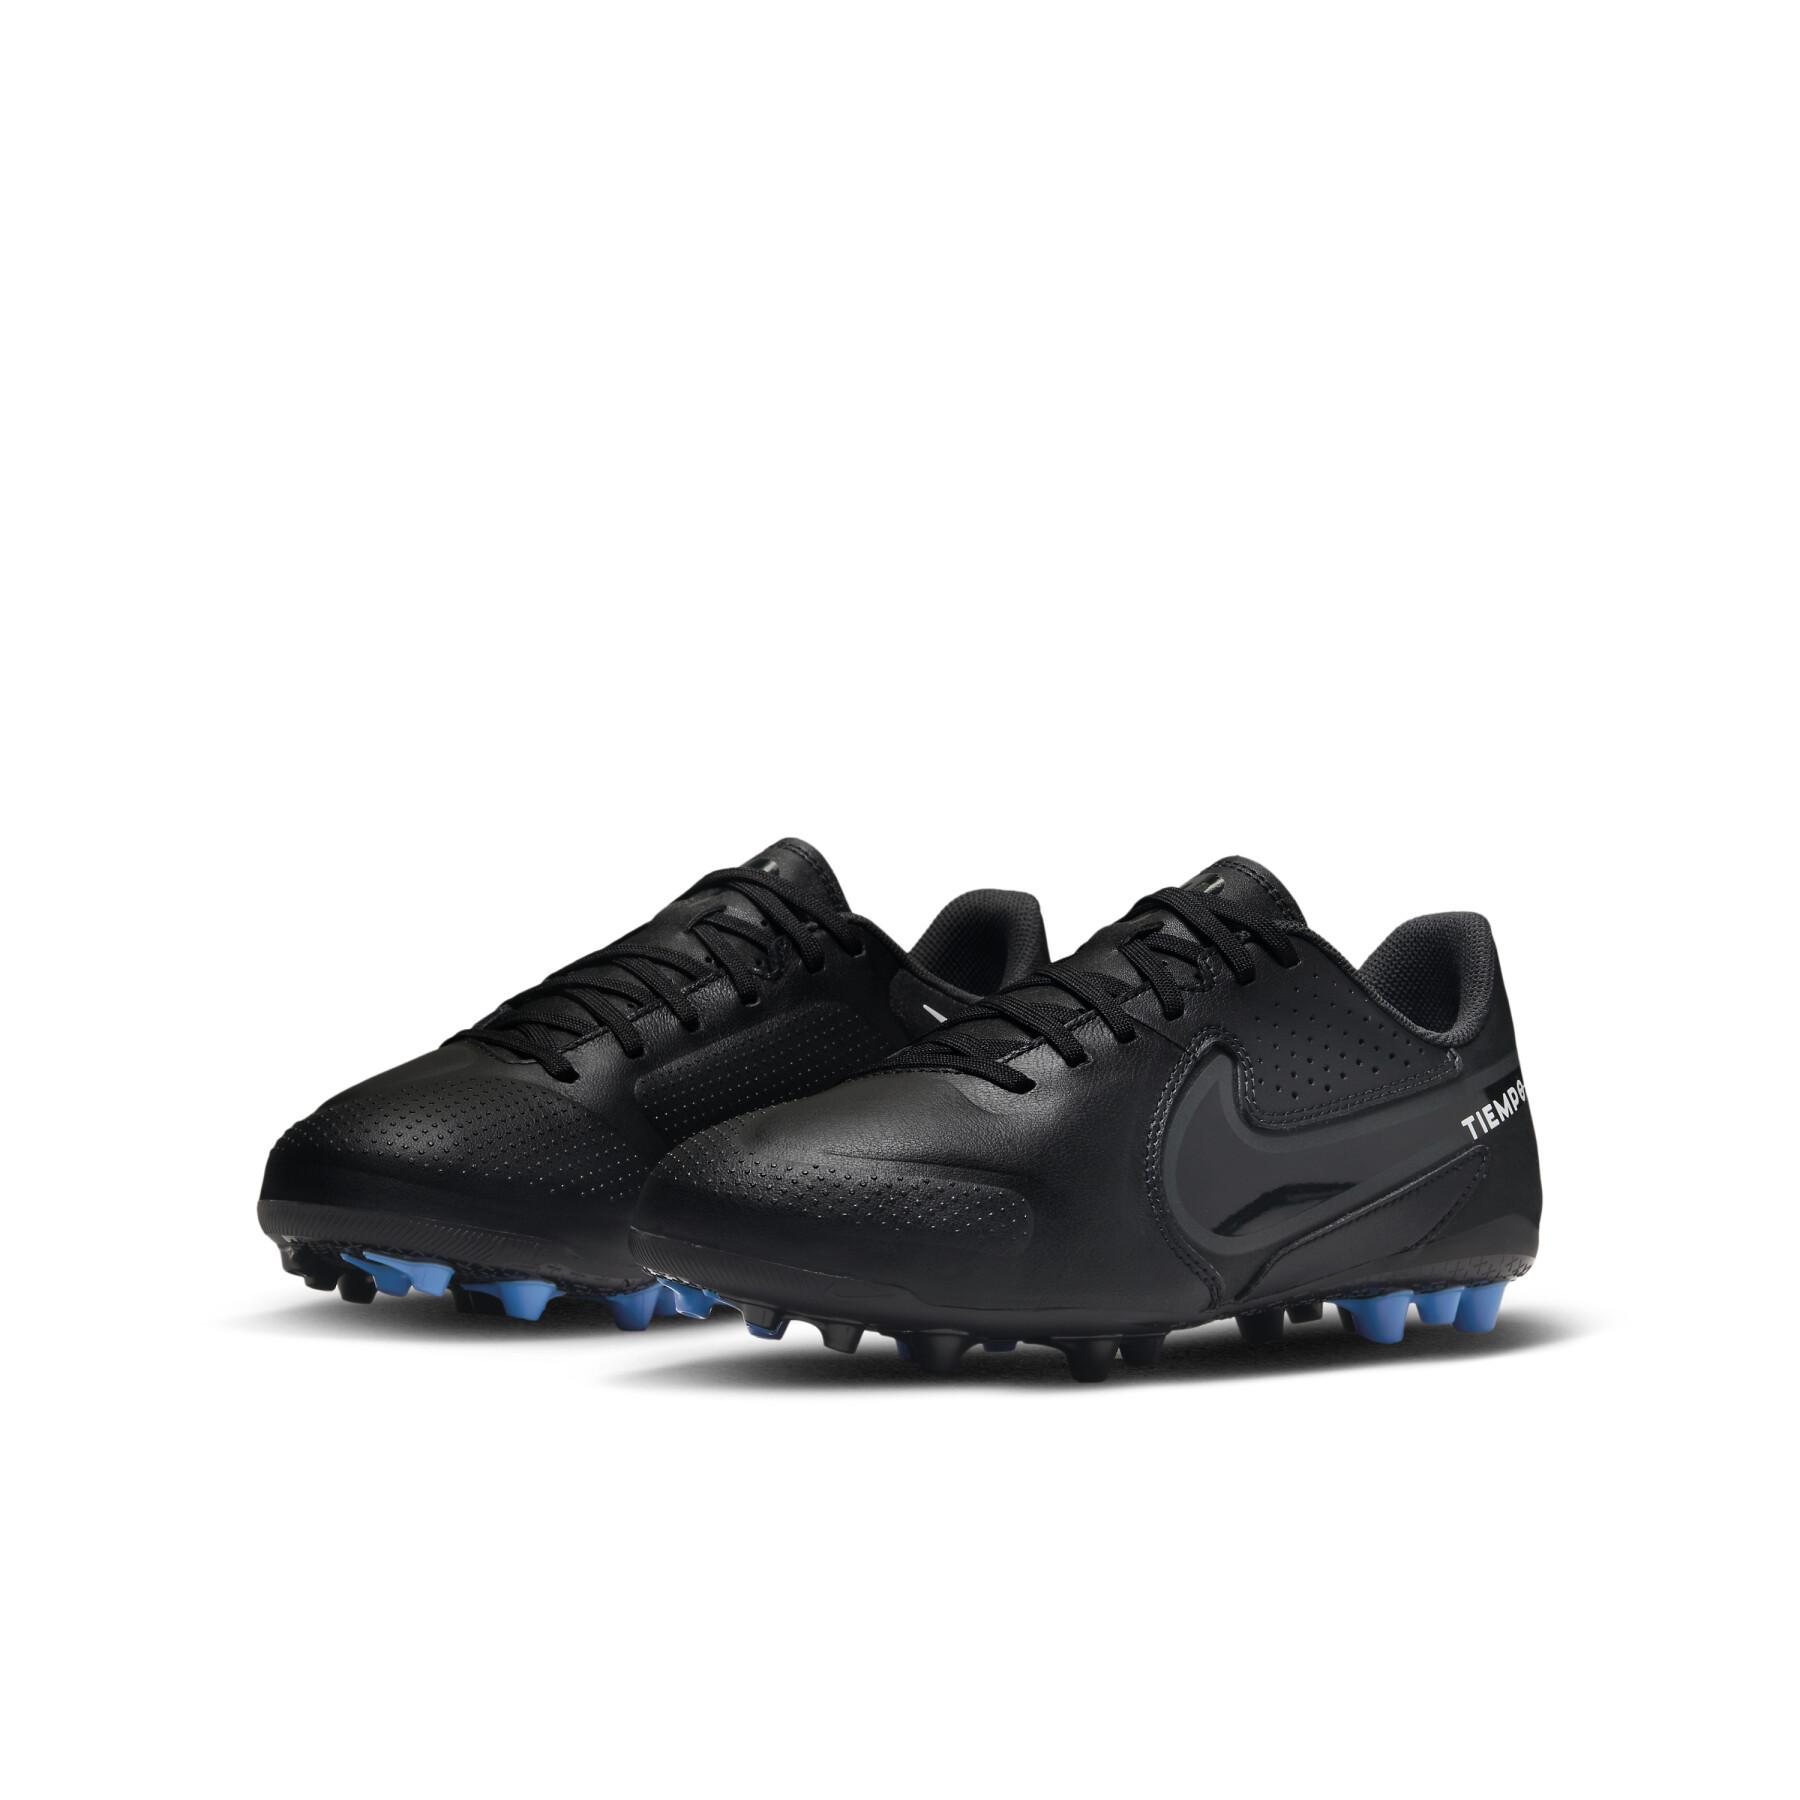 Children's soccer shoes Nike Tiempo Legend 9 Academy AG - Shadow Black Pack